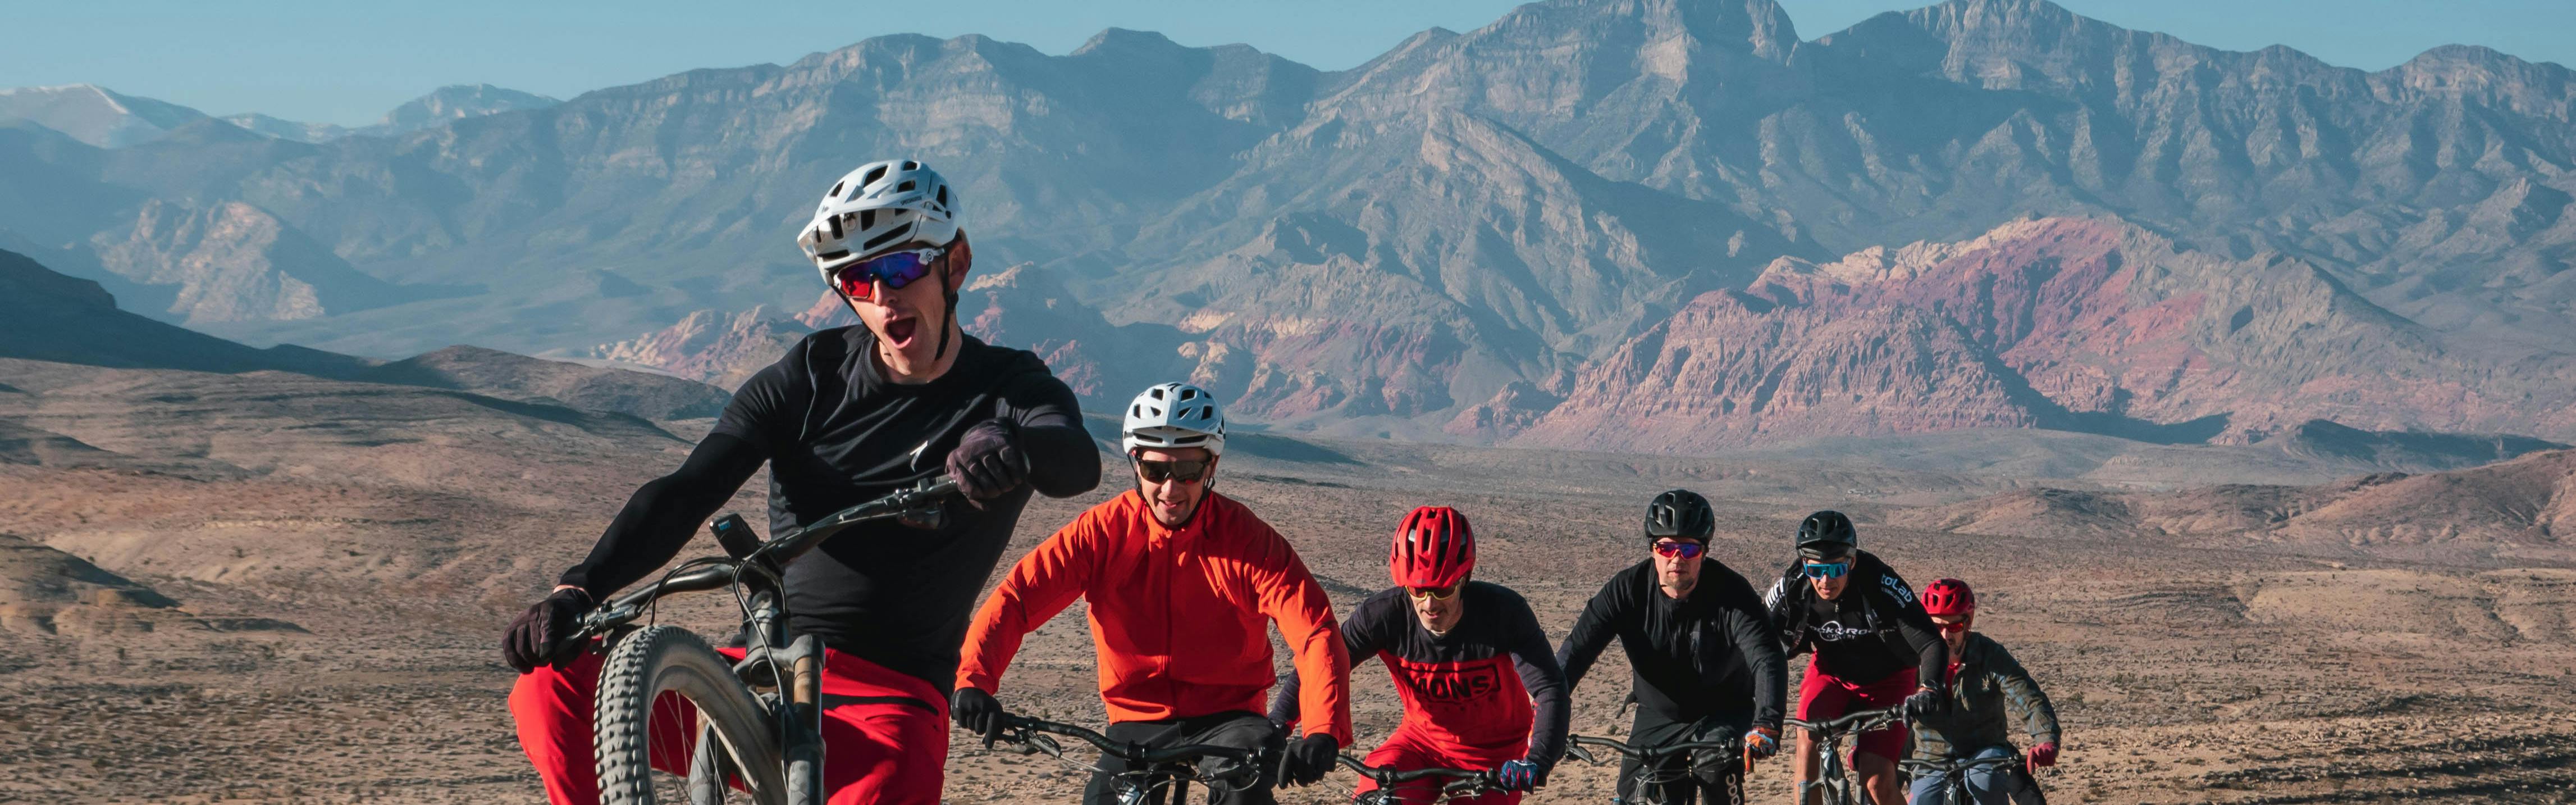 Specialized General Manager Sam Benedict mountain biking and leading a group of five other friends on mountain bikes down a desert path with beautiful, red-tinged mountains in the distance.